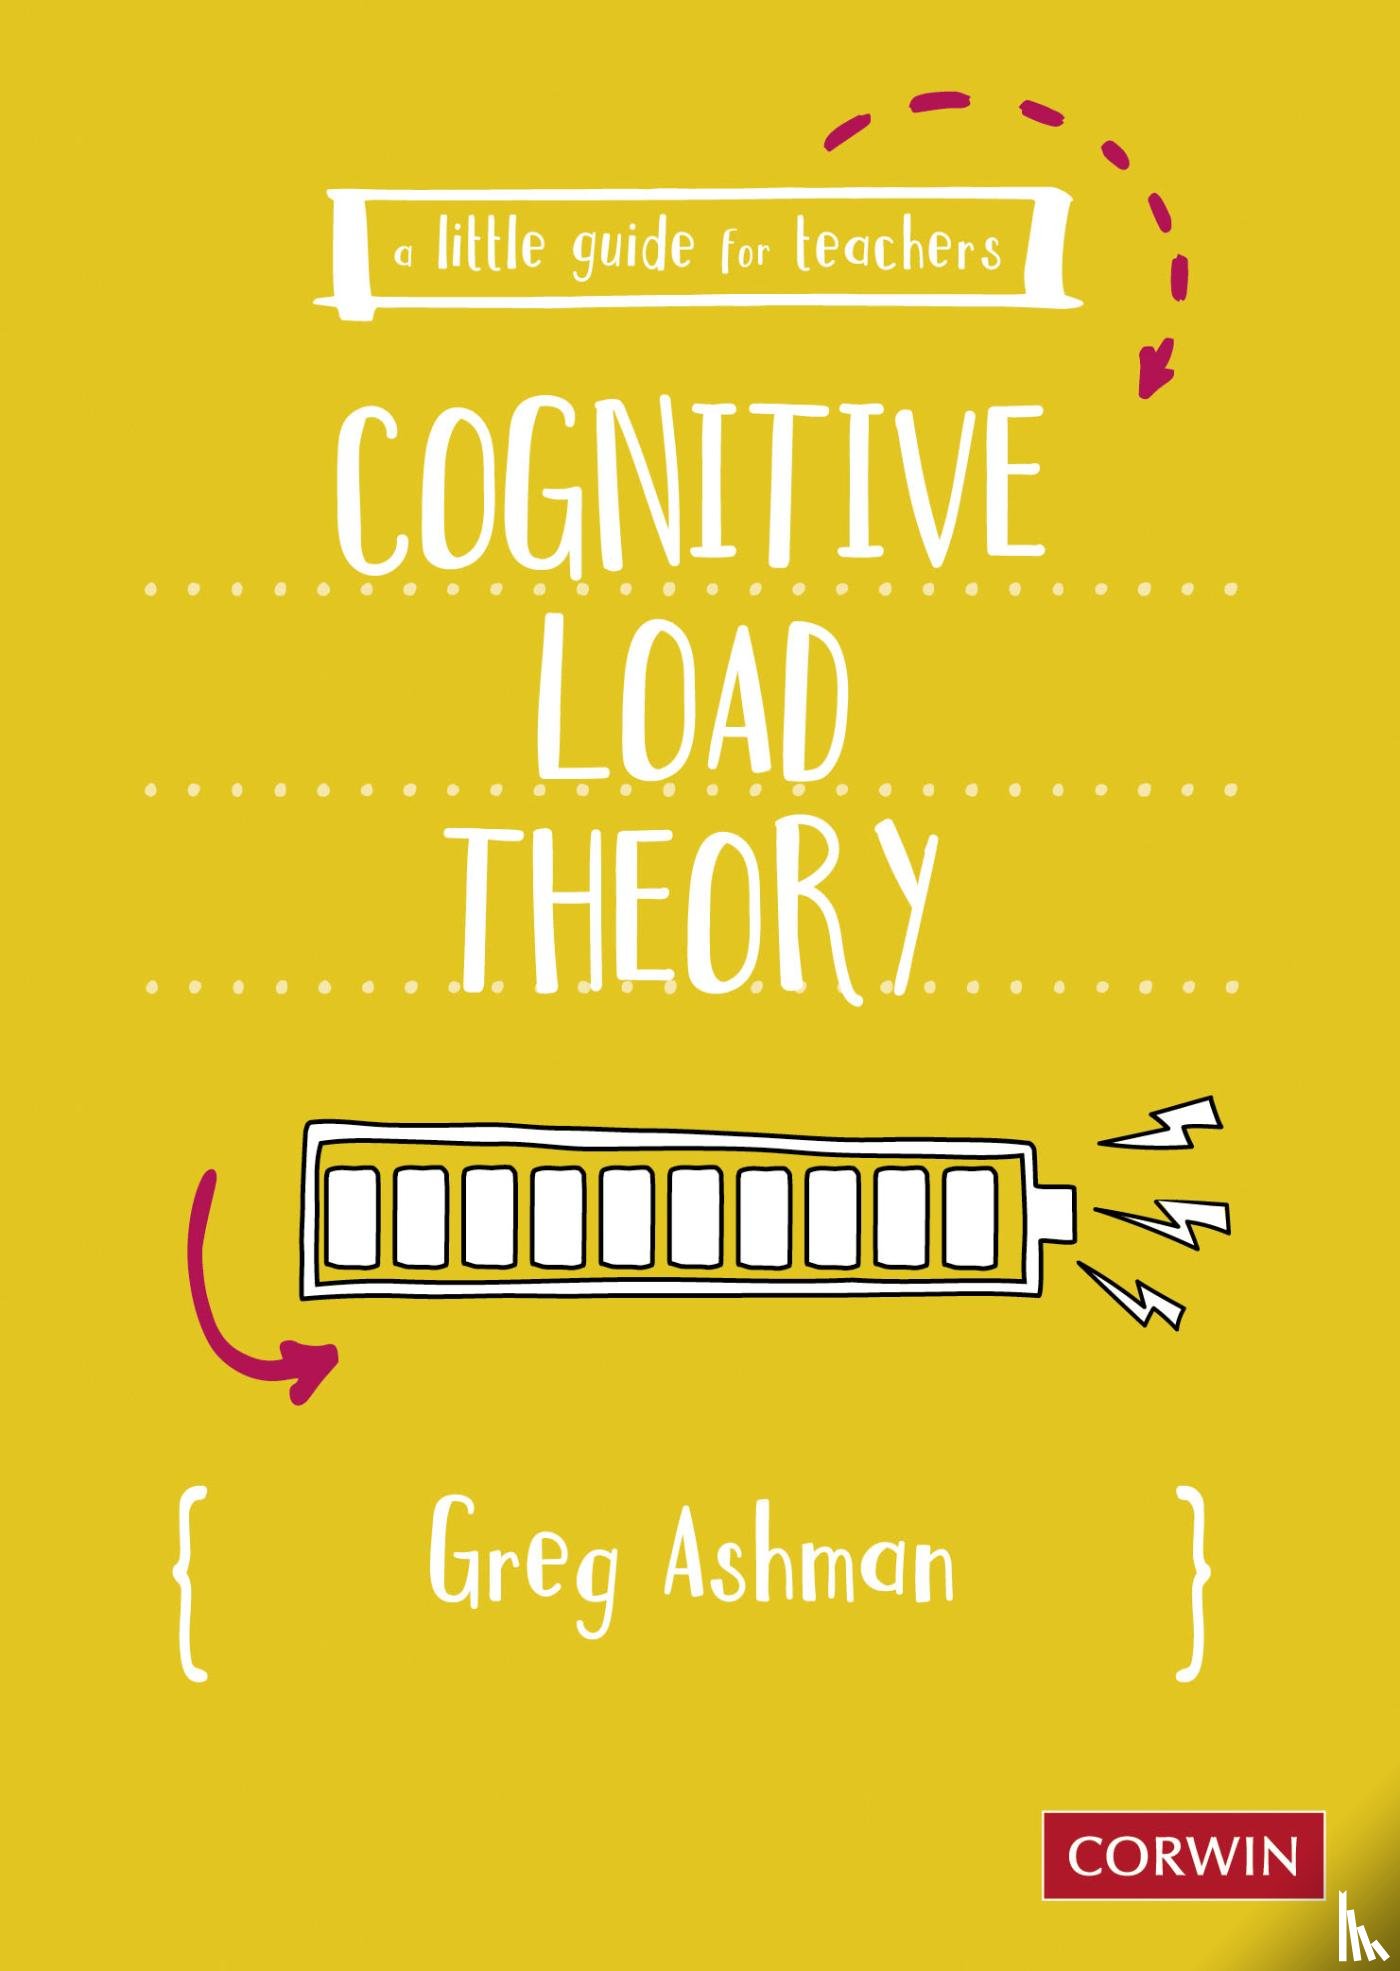 Ashman - A Little Guide for Teachers: Cognitive Load Theory